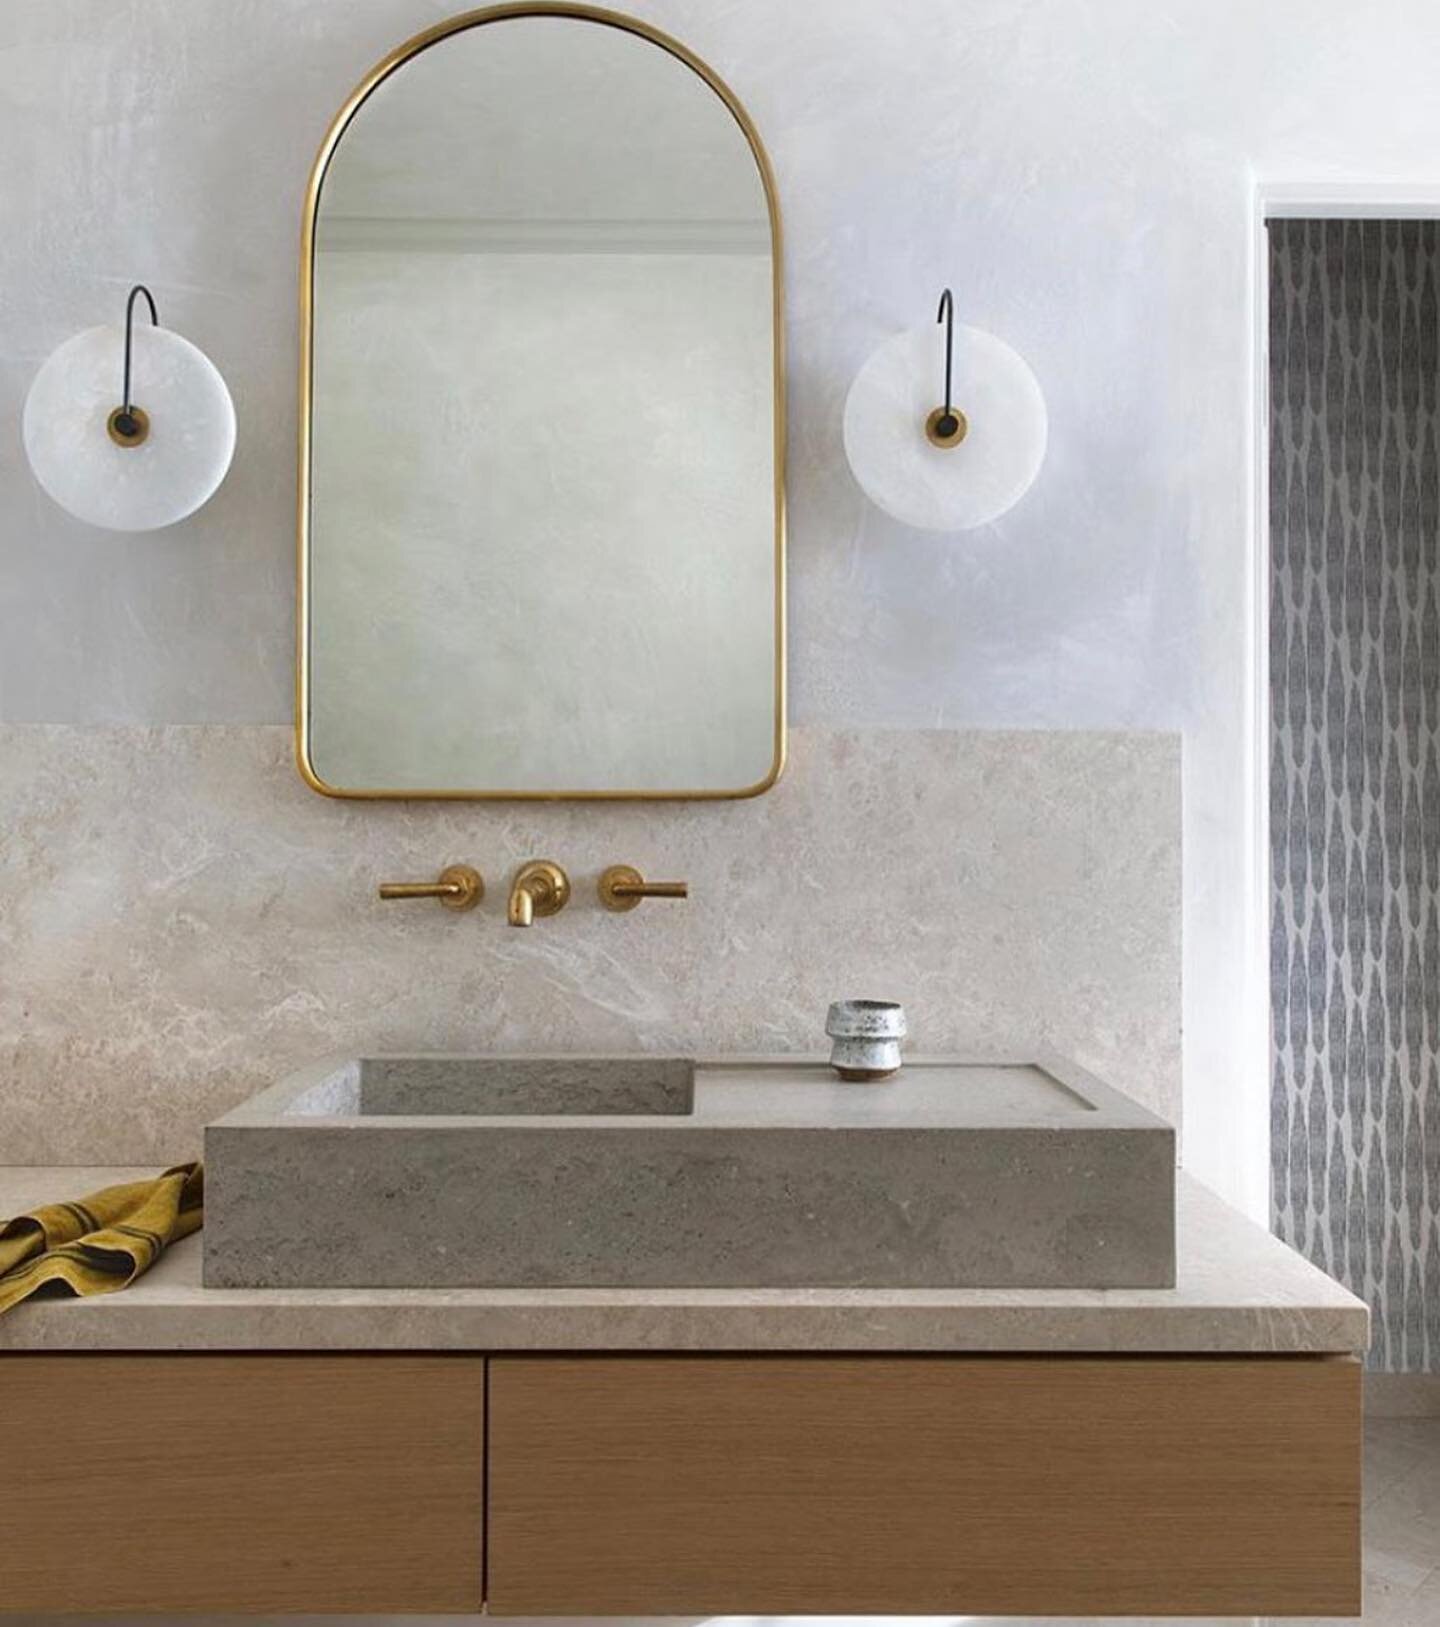 Bathroom inspiration!
Nowadays bathrooms are our retreat spa at home.
Bathrooms can reflect your personality and sense of style in many ways. A good designer can create a beautiful bathroom oasis that is also functional.
Some tips while designing you